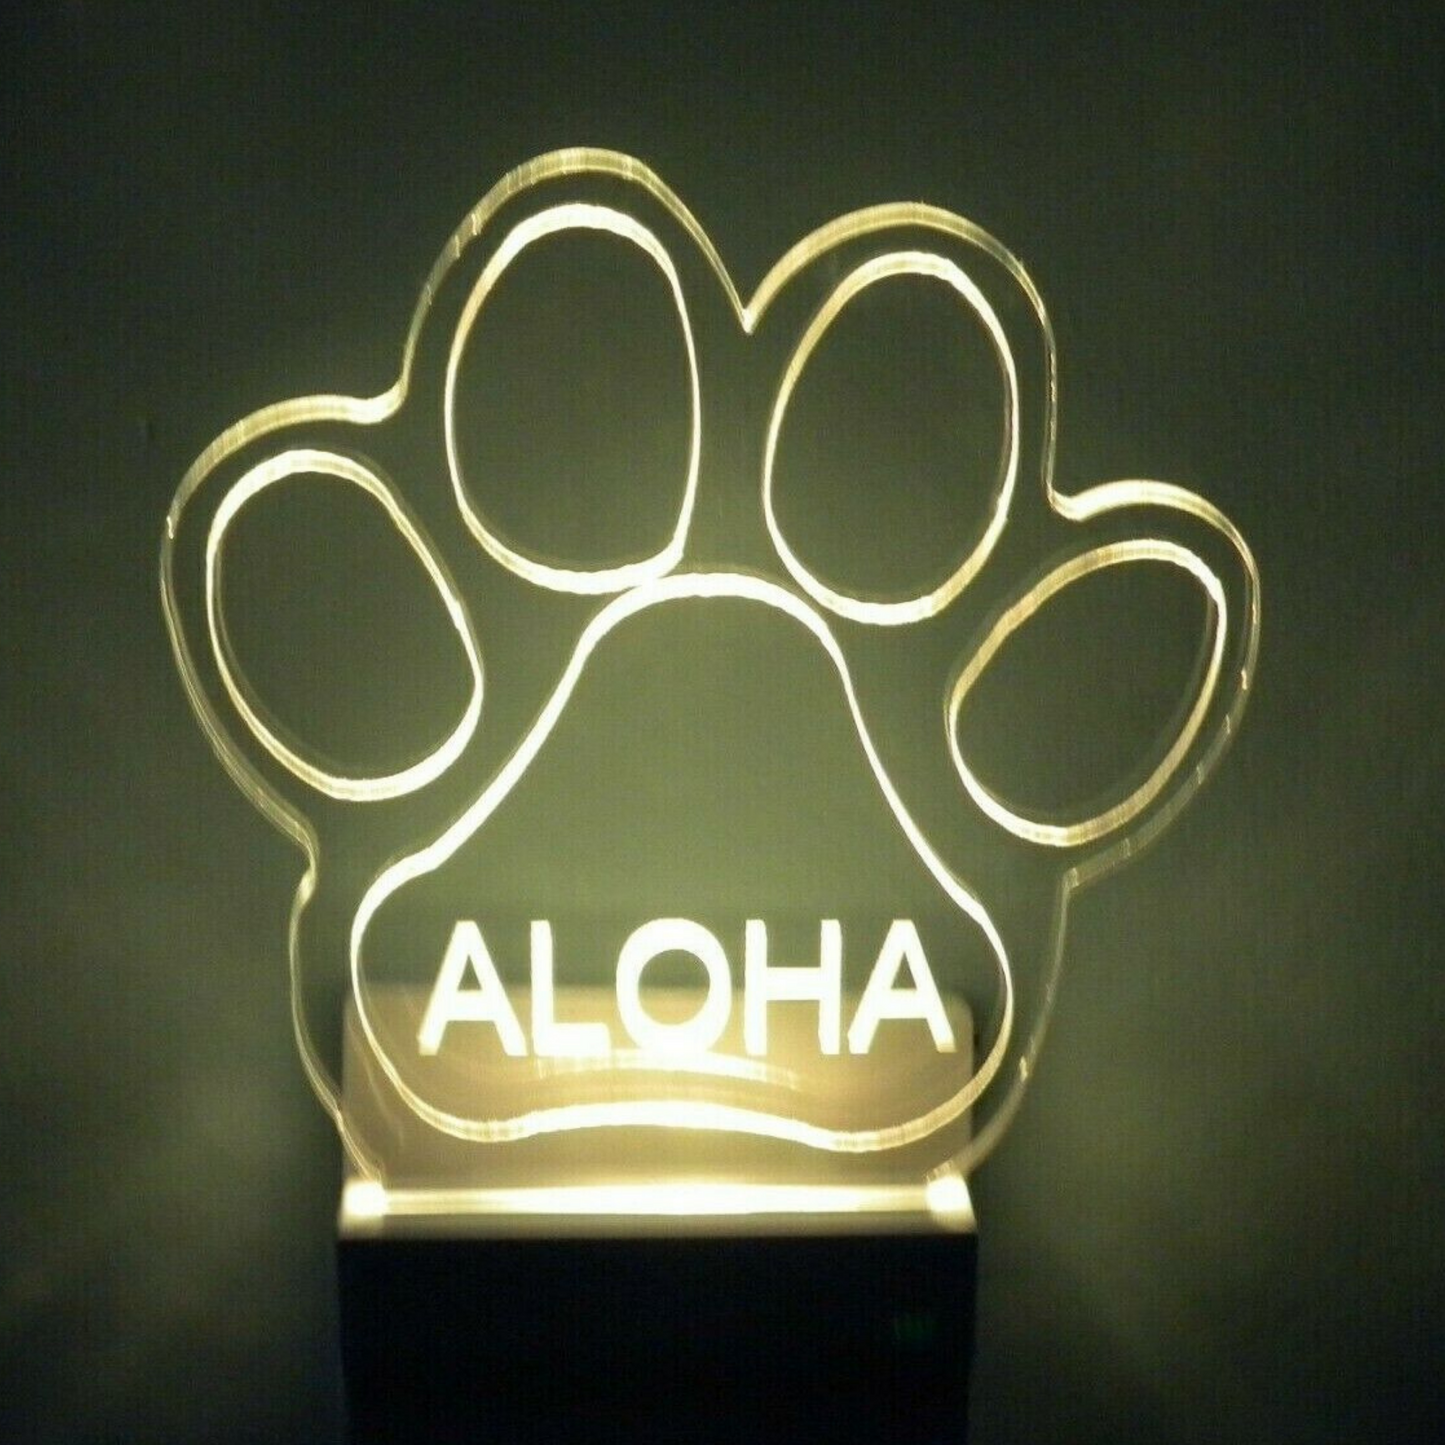 Paw Print Night Light Multi Color Personalized LED Wall Plug-in, Cool-Touch Smart Dusk to Dawn Sensor Children's Bedroom Hallway, Super Cool